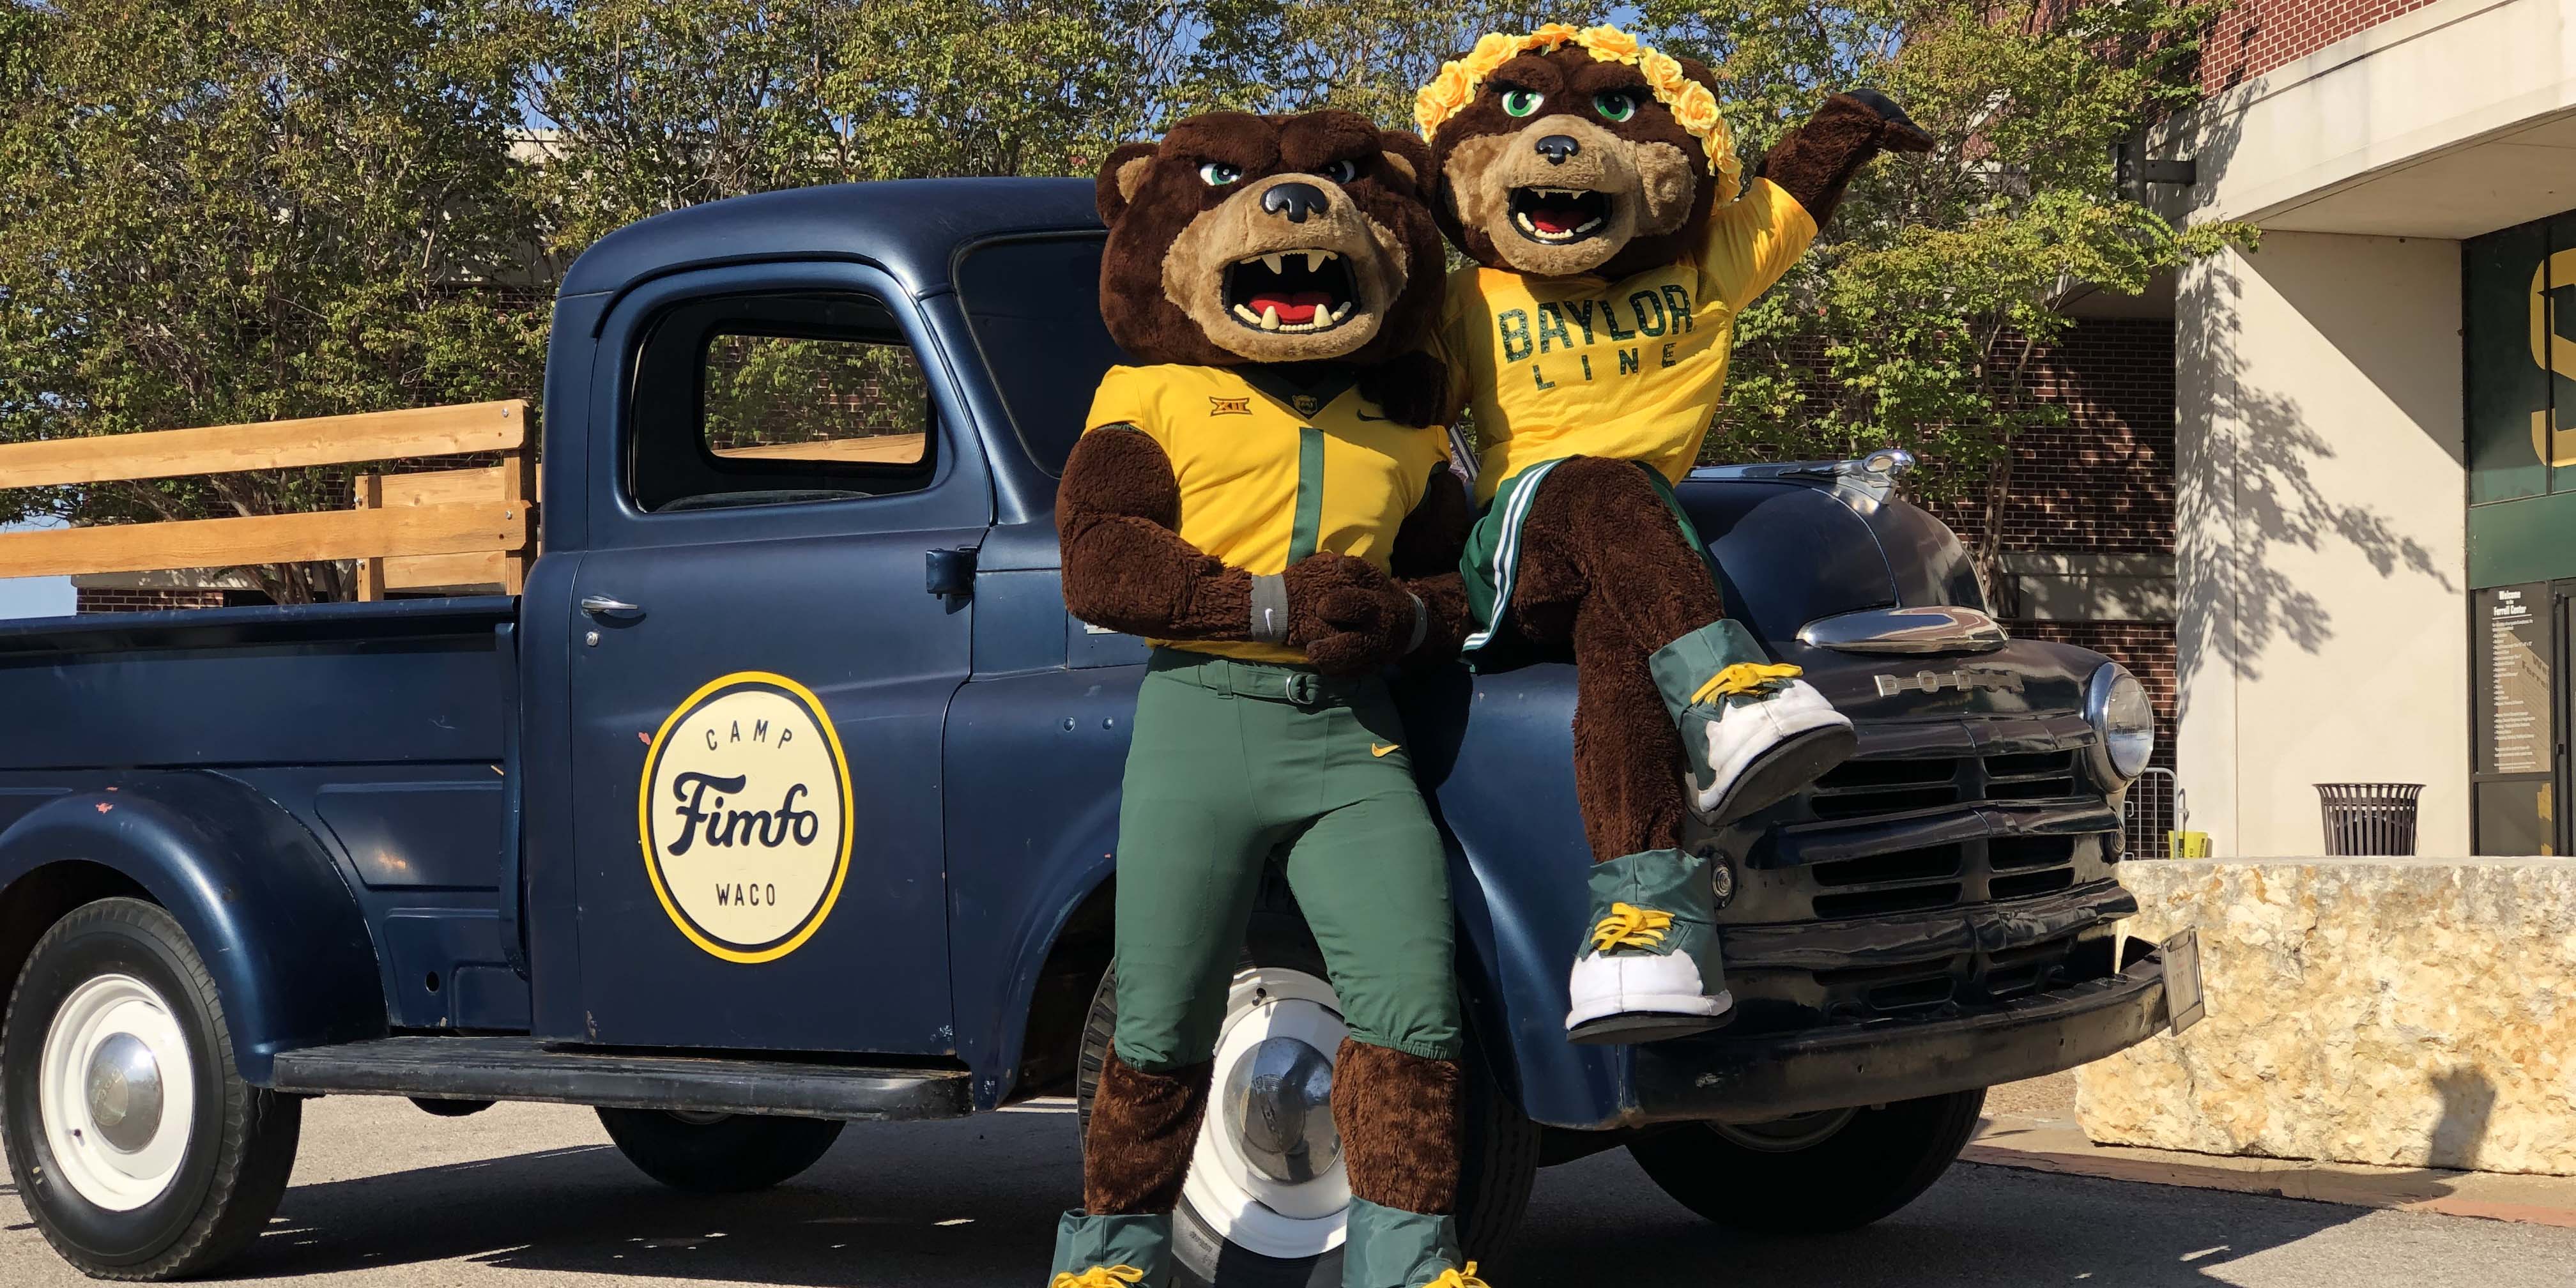 The Baylor University mascots, Merigold and Bruiser, posing in front of a Camp Fimfo Waco truck at McLane Stadium